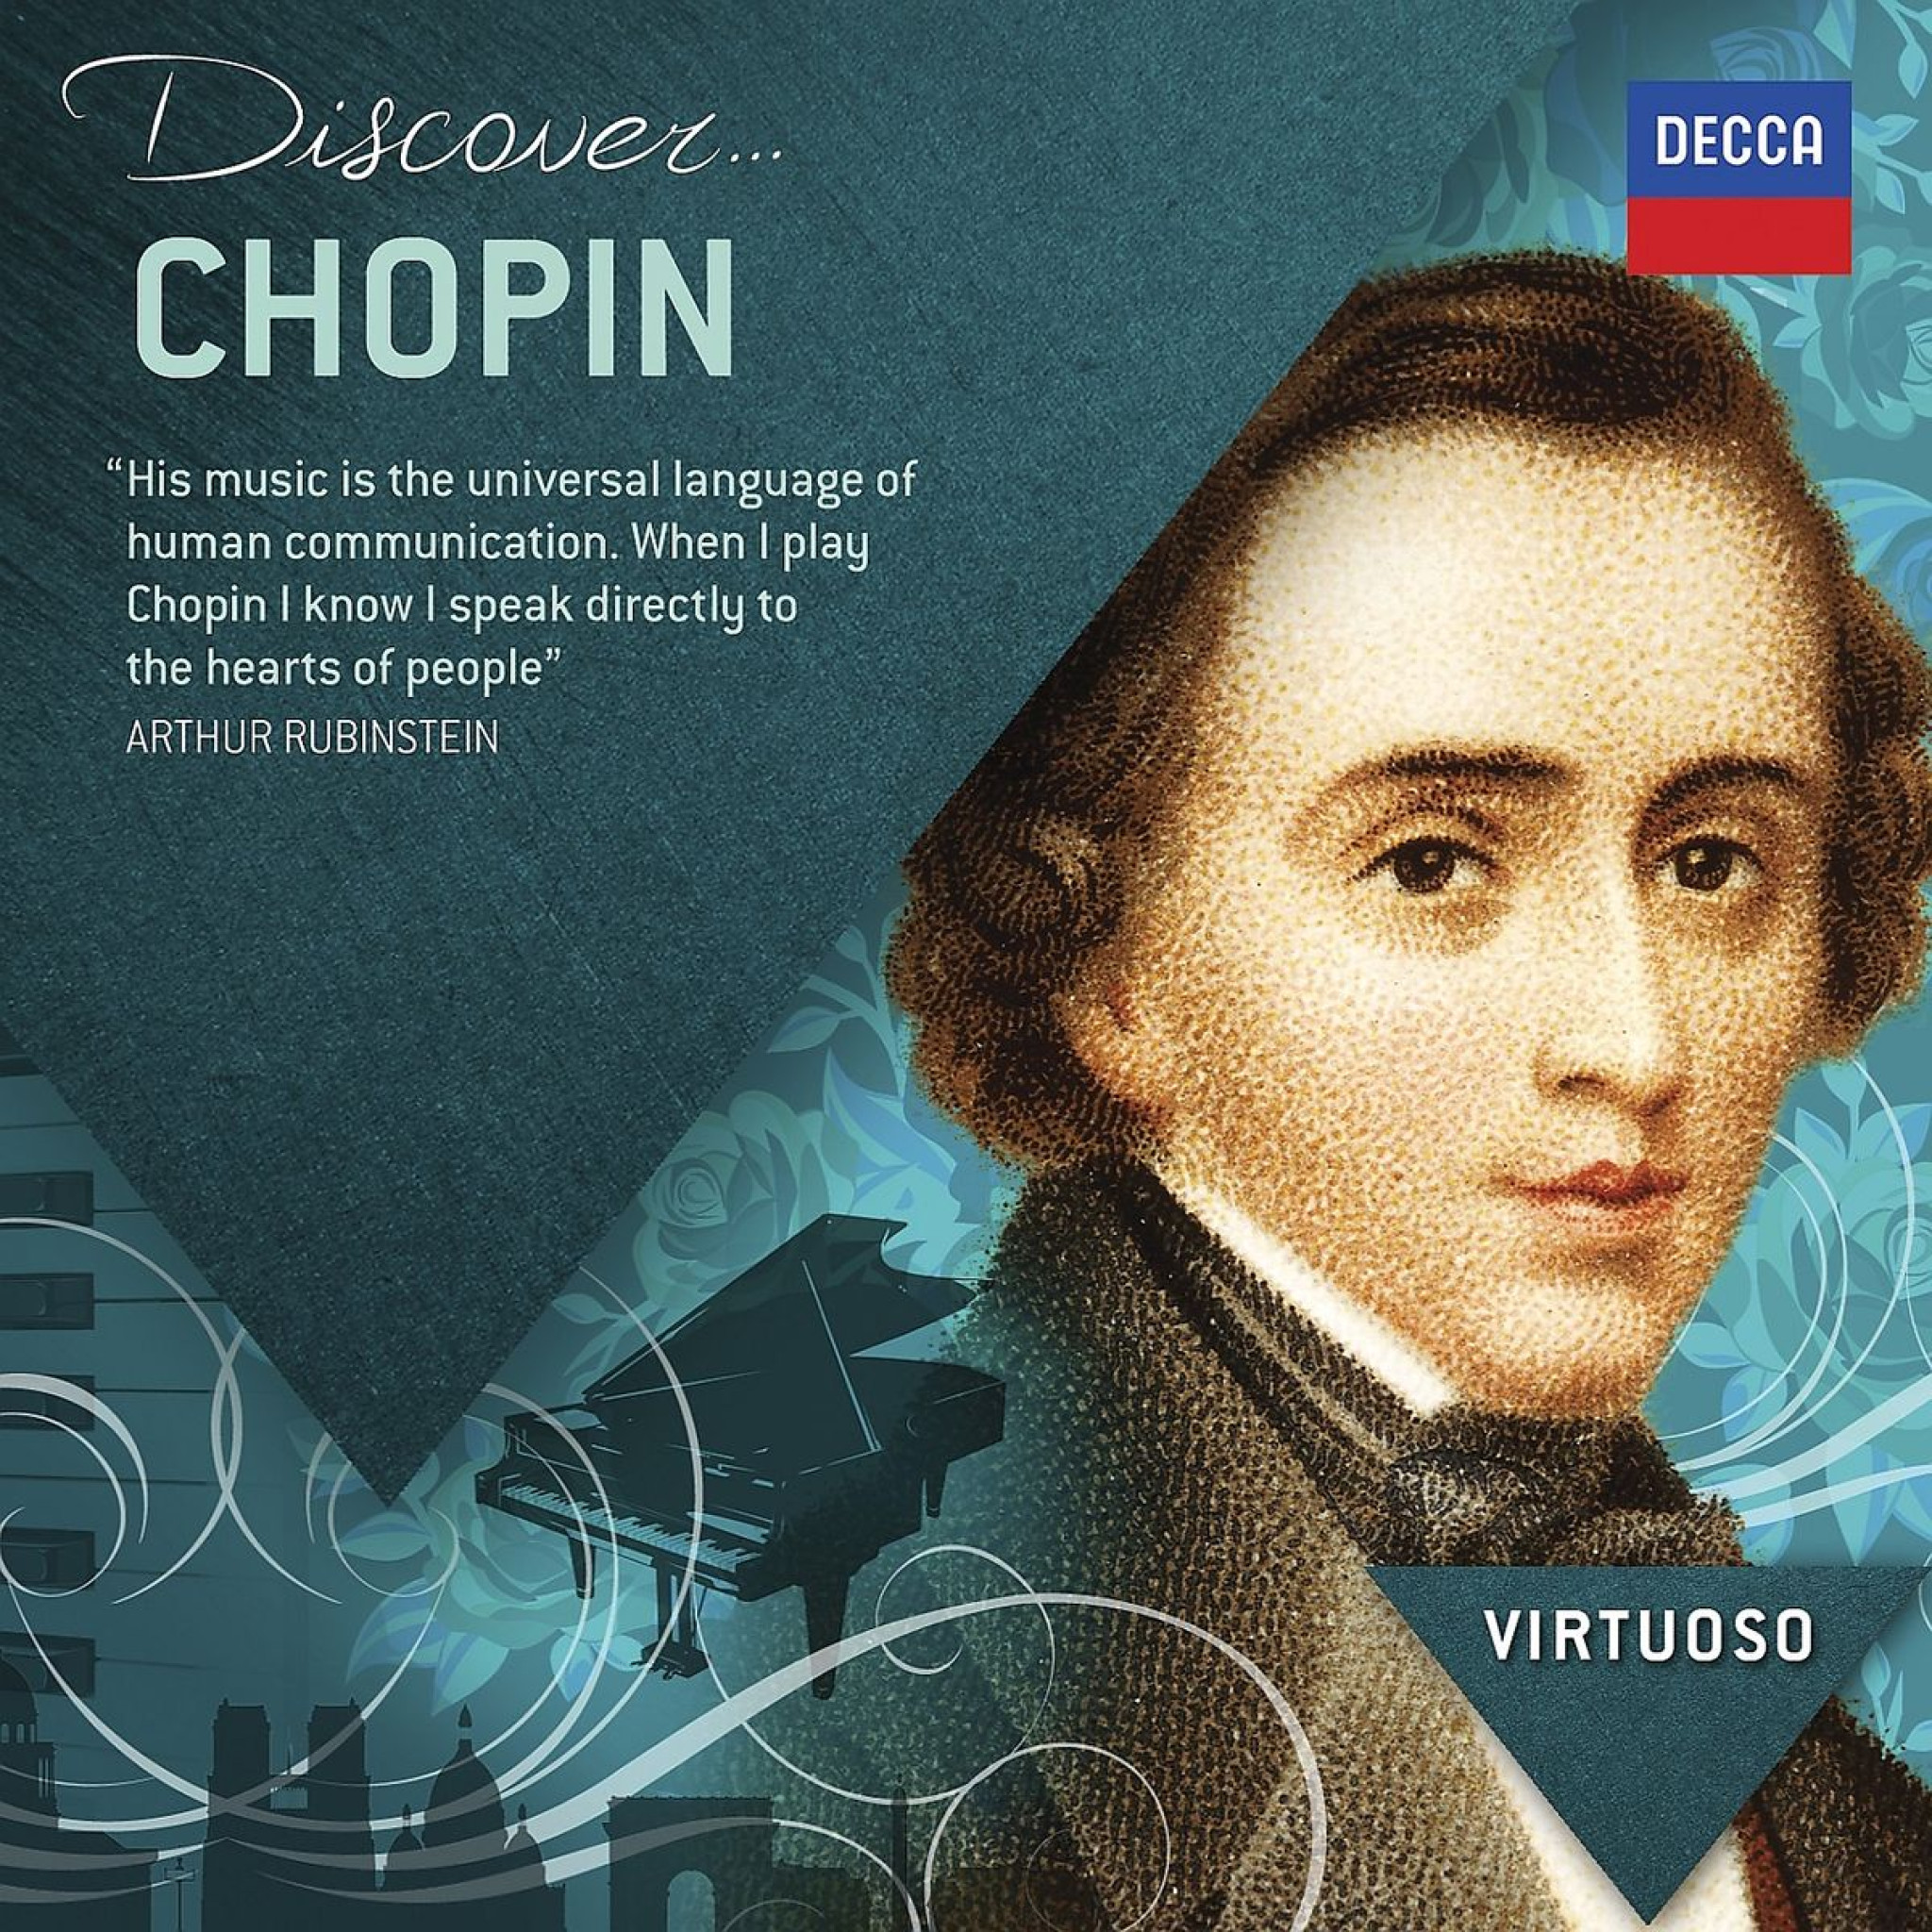 Discover ... CHOPIN